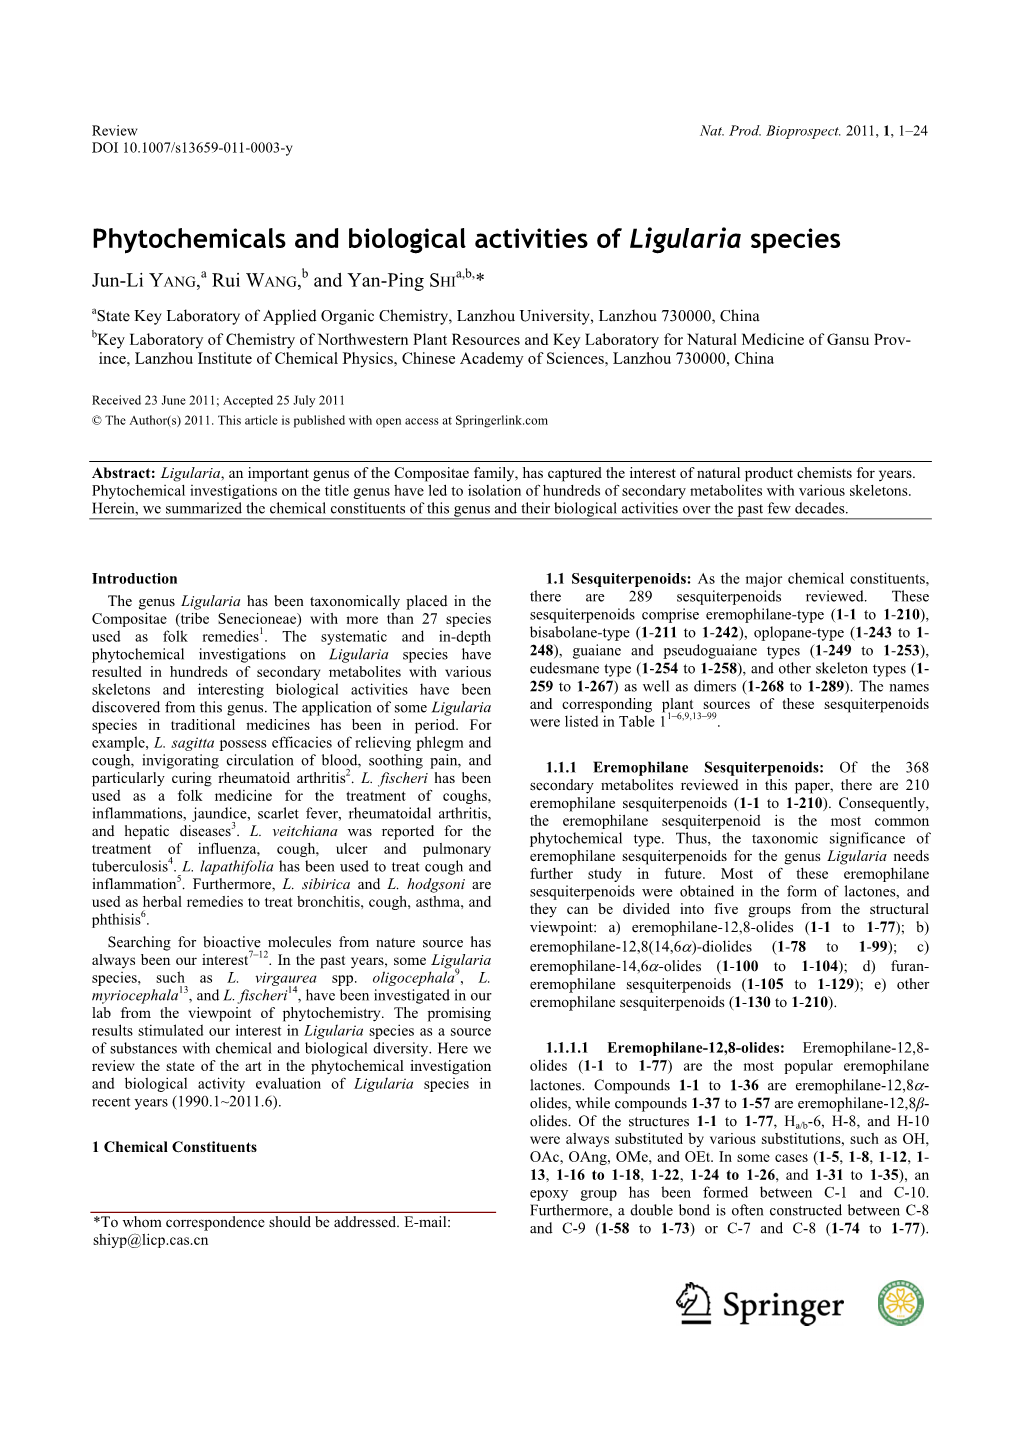 Phytochemicals and Biological Activities of Ligularia Species